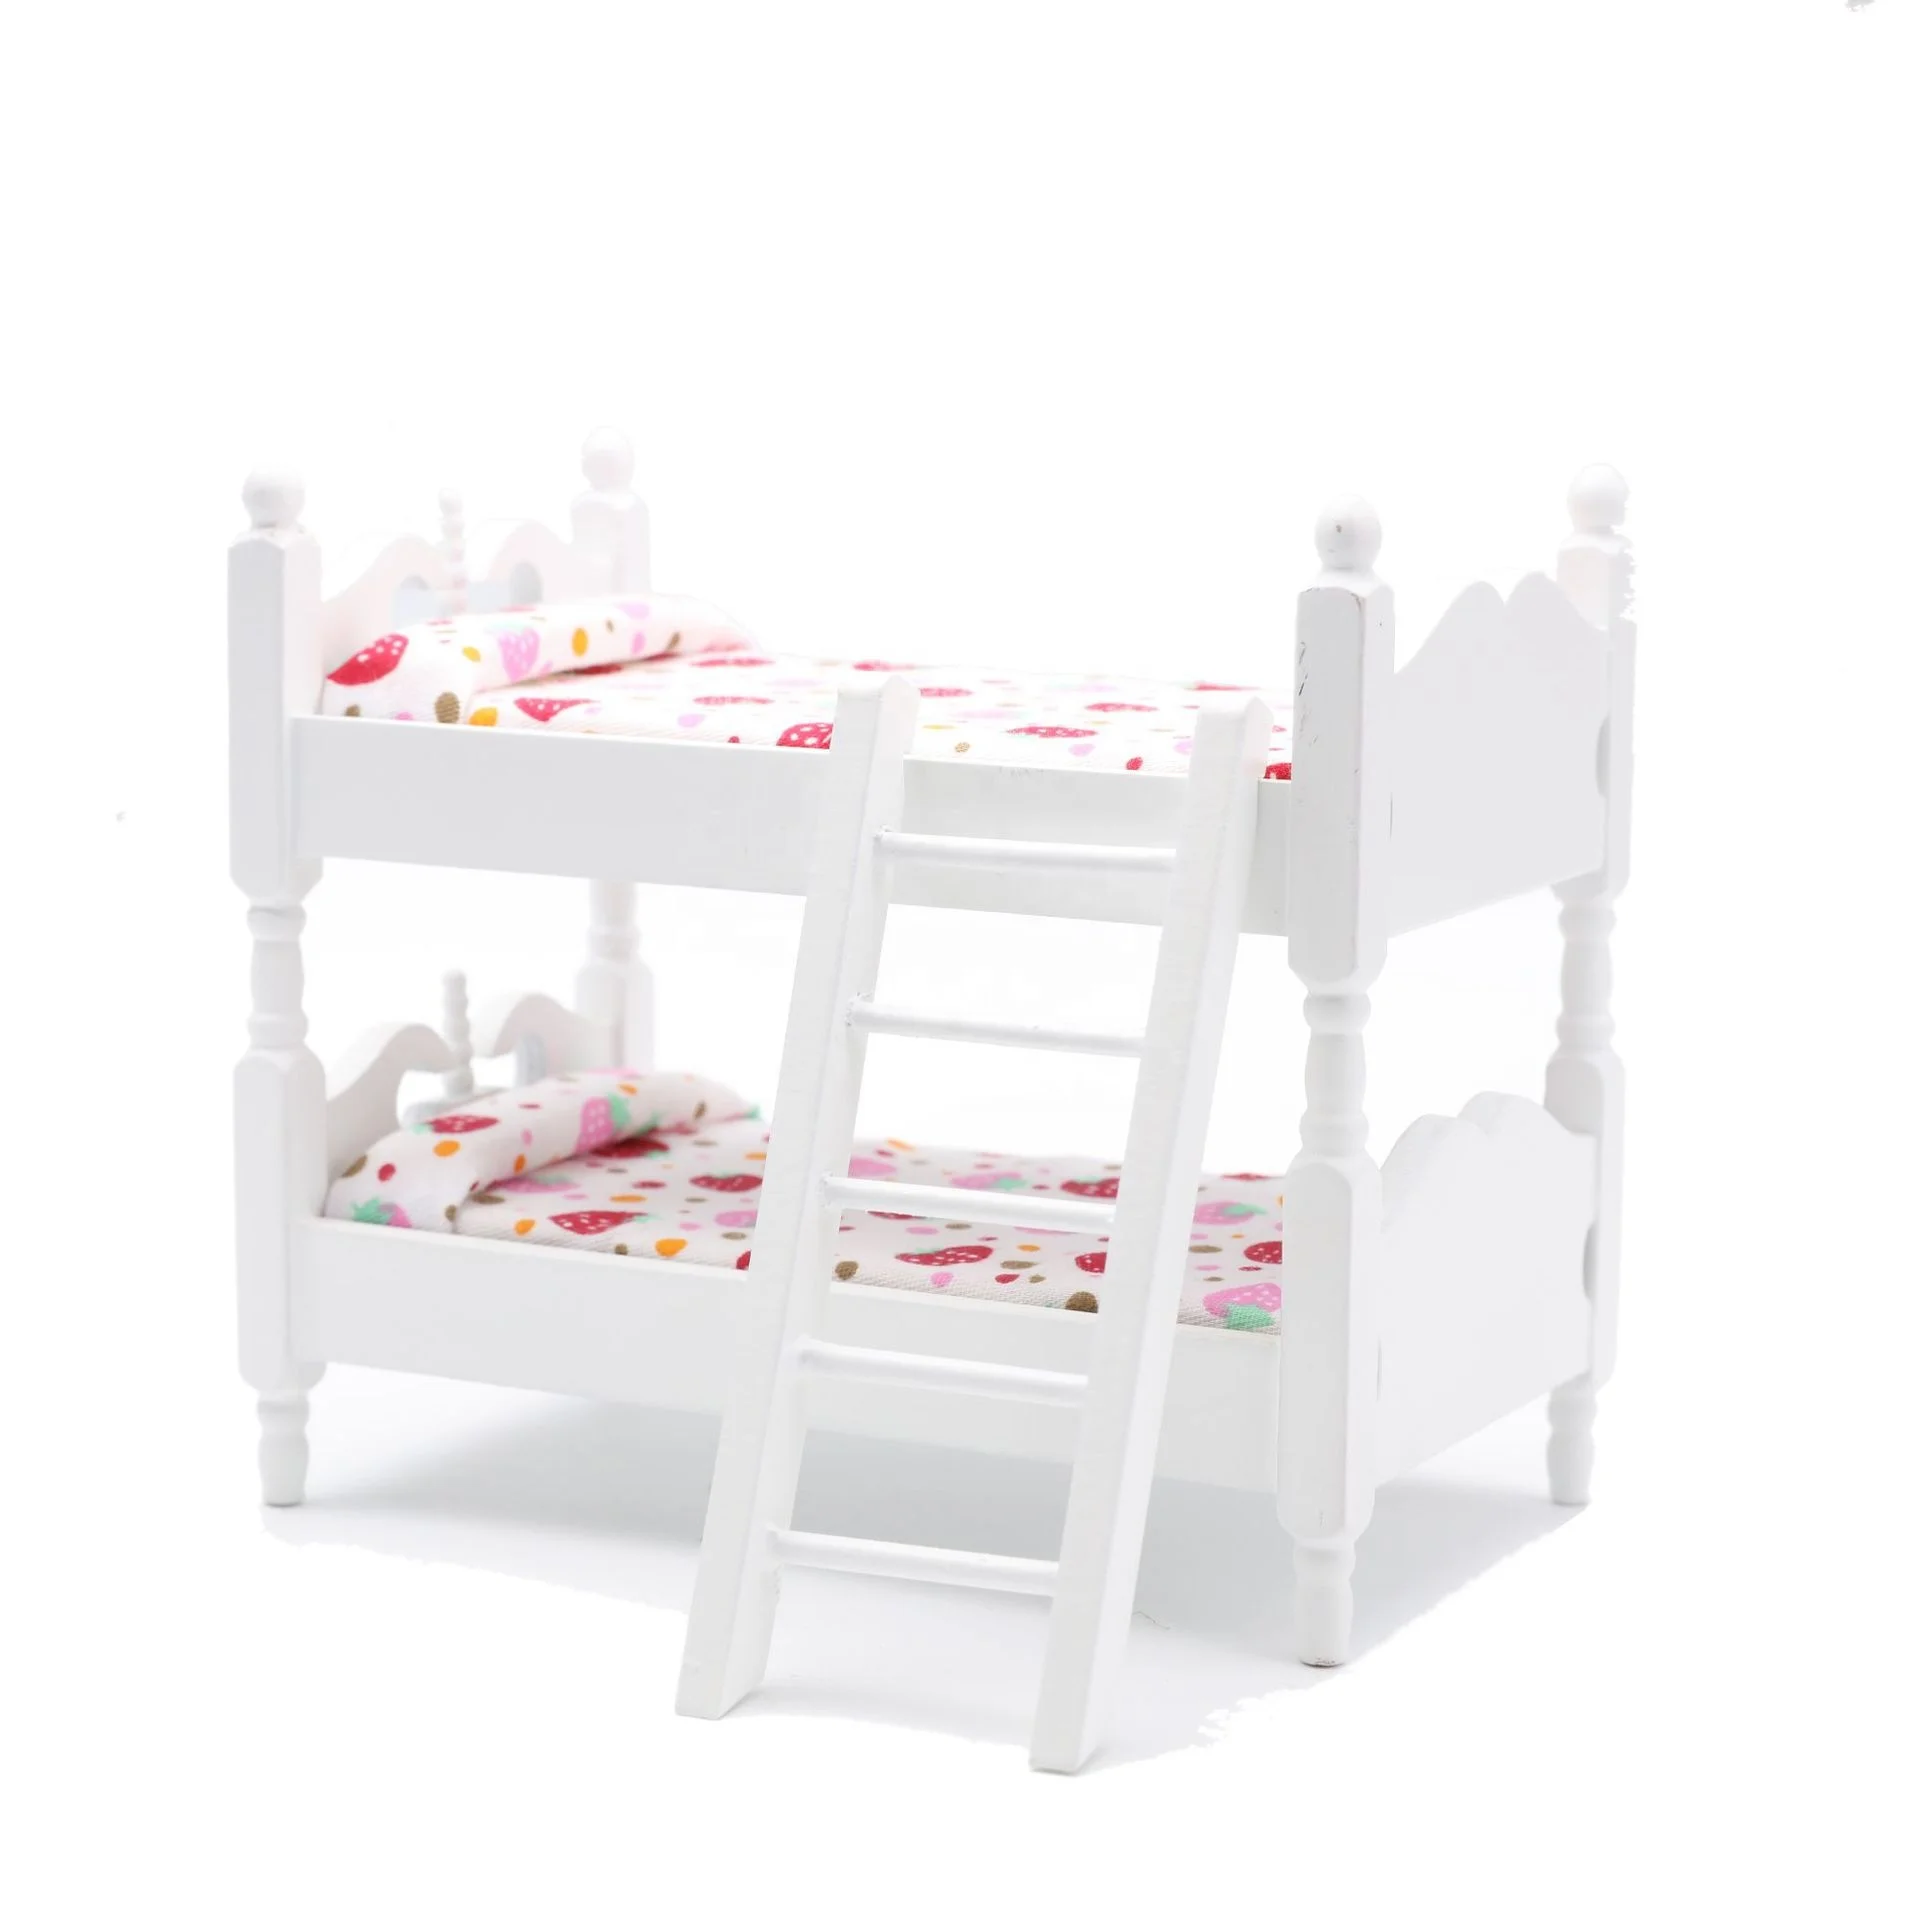 Cute Wooden Doll Furniture Doll Bunk Bed Hot Sell Cheap Baby Wooden Bunk Doll Bed Buy Doll Bed Doll Bunk Bed Wooden Bunk Doll Bed Product On Alibaba Com